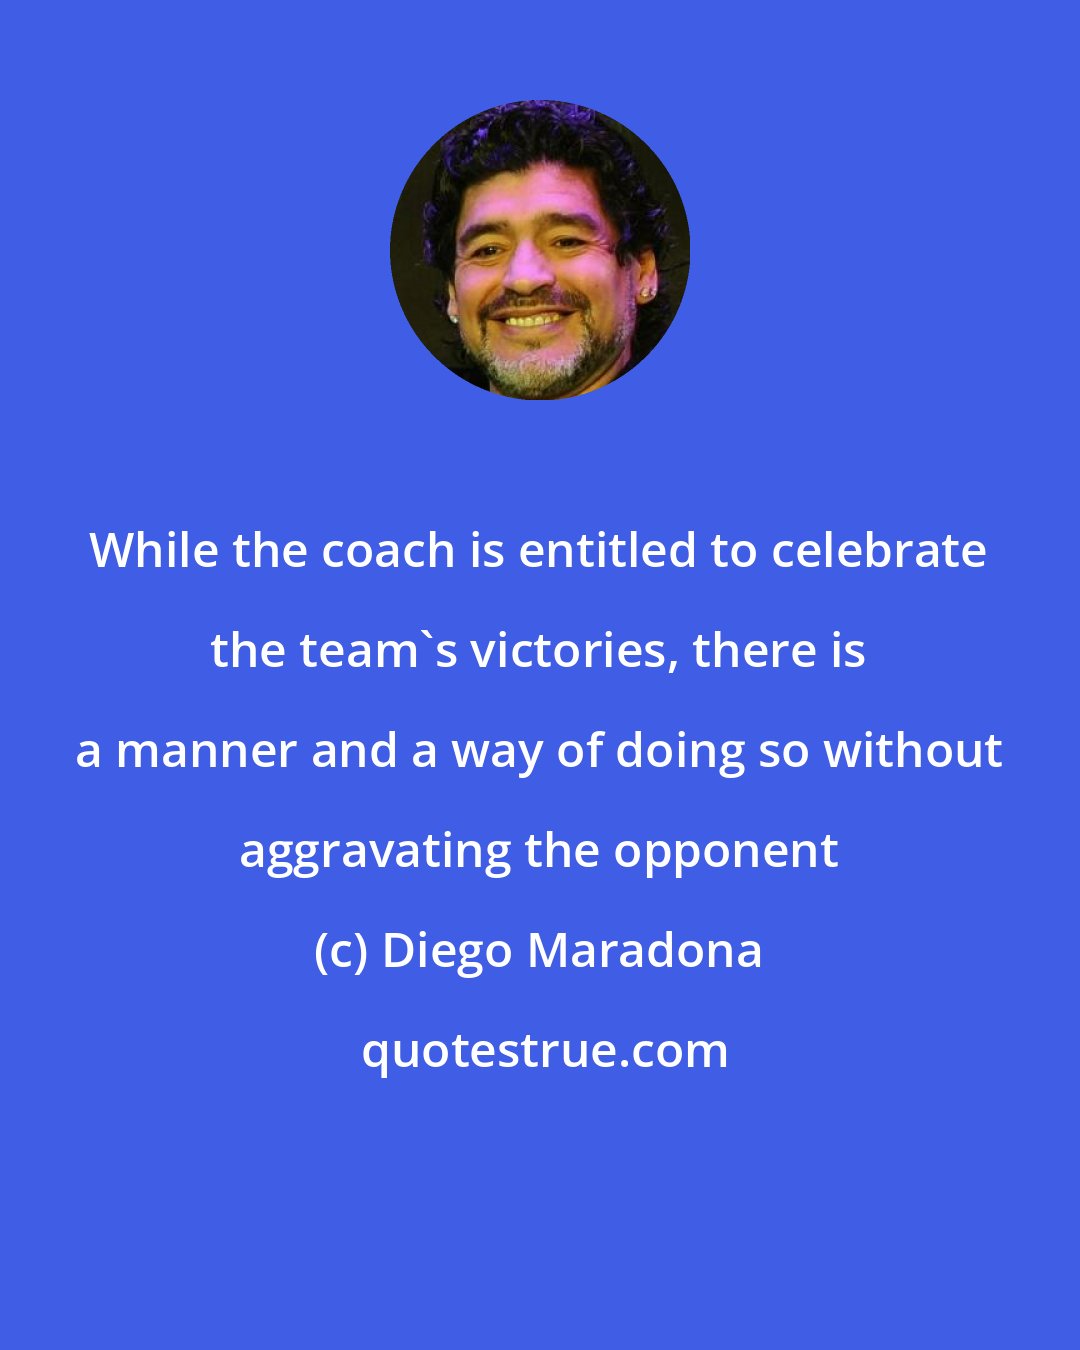 Diego Maradona: While the coach is entitled to celebrate the team's victories, there is a manner and a way of doing so without aggravating the opponent